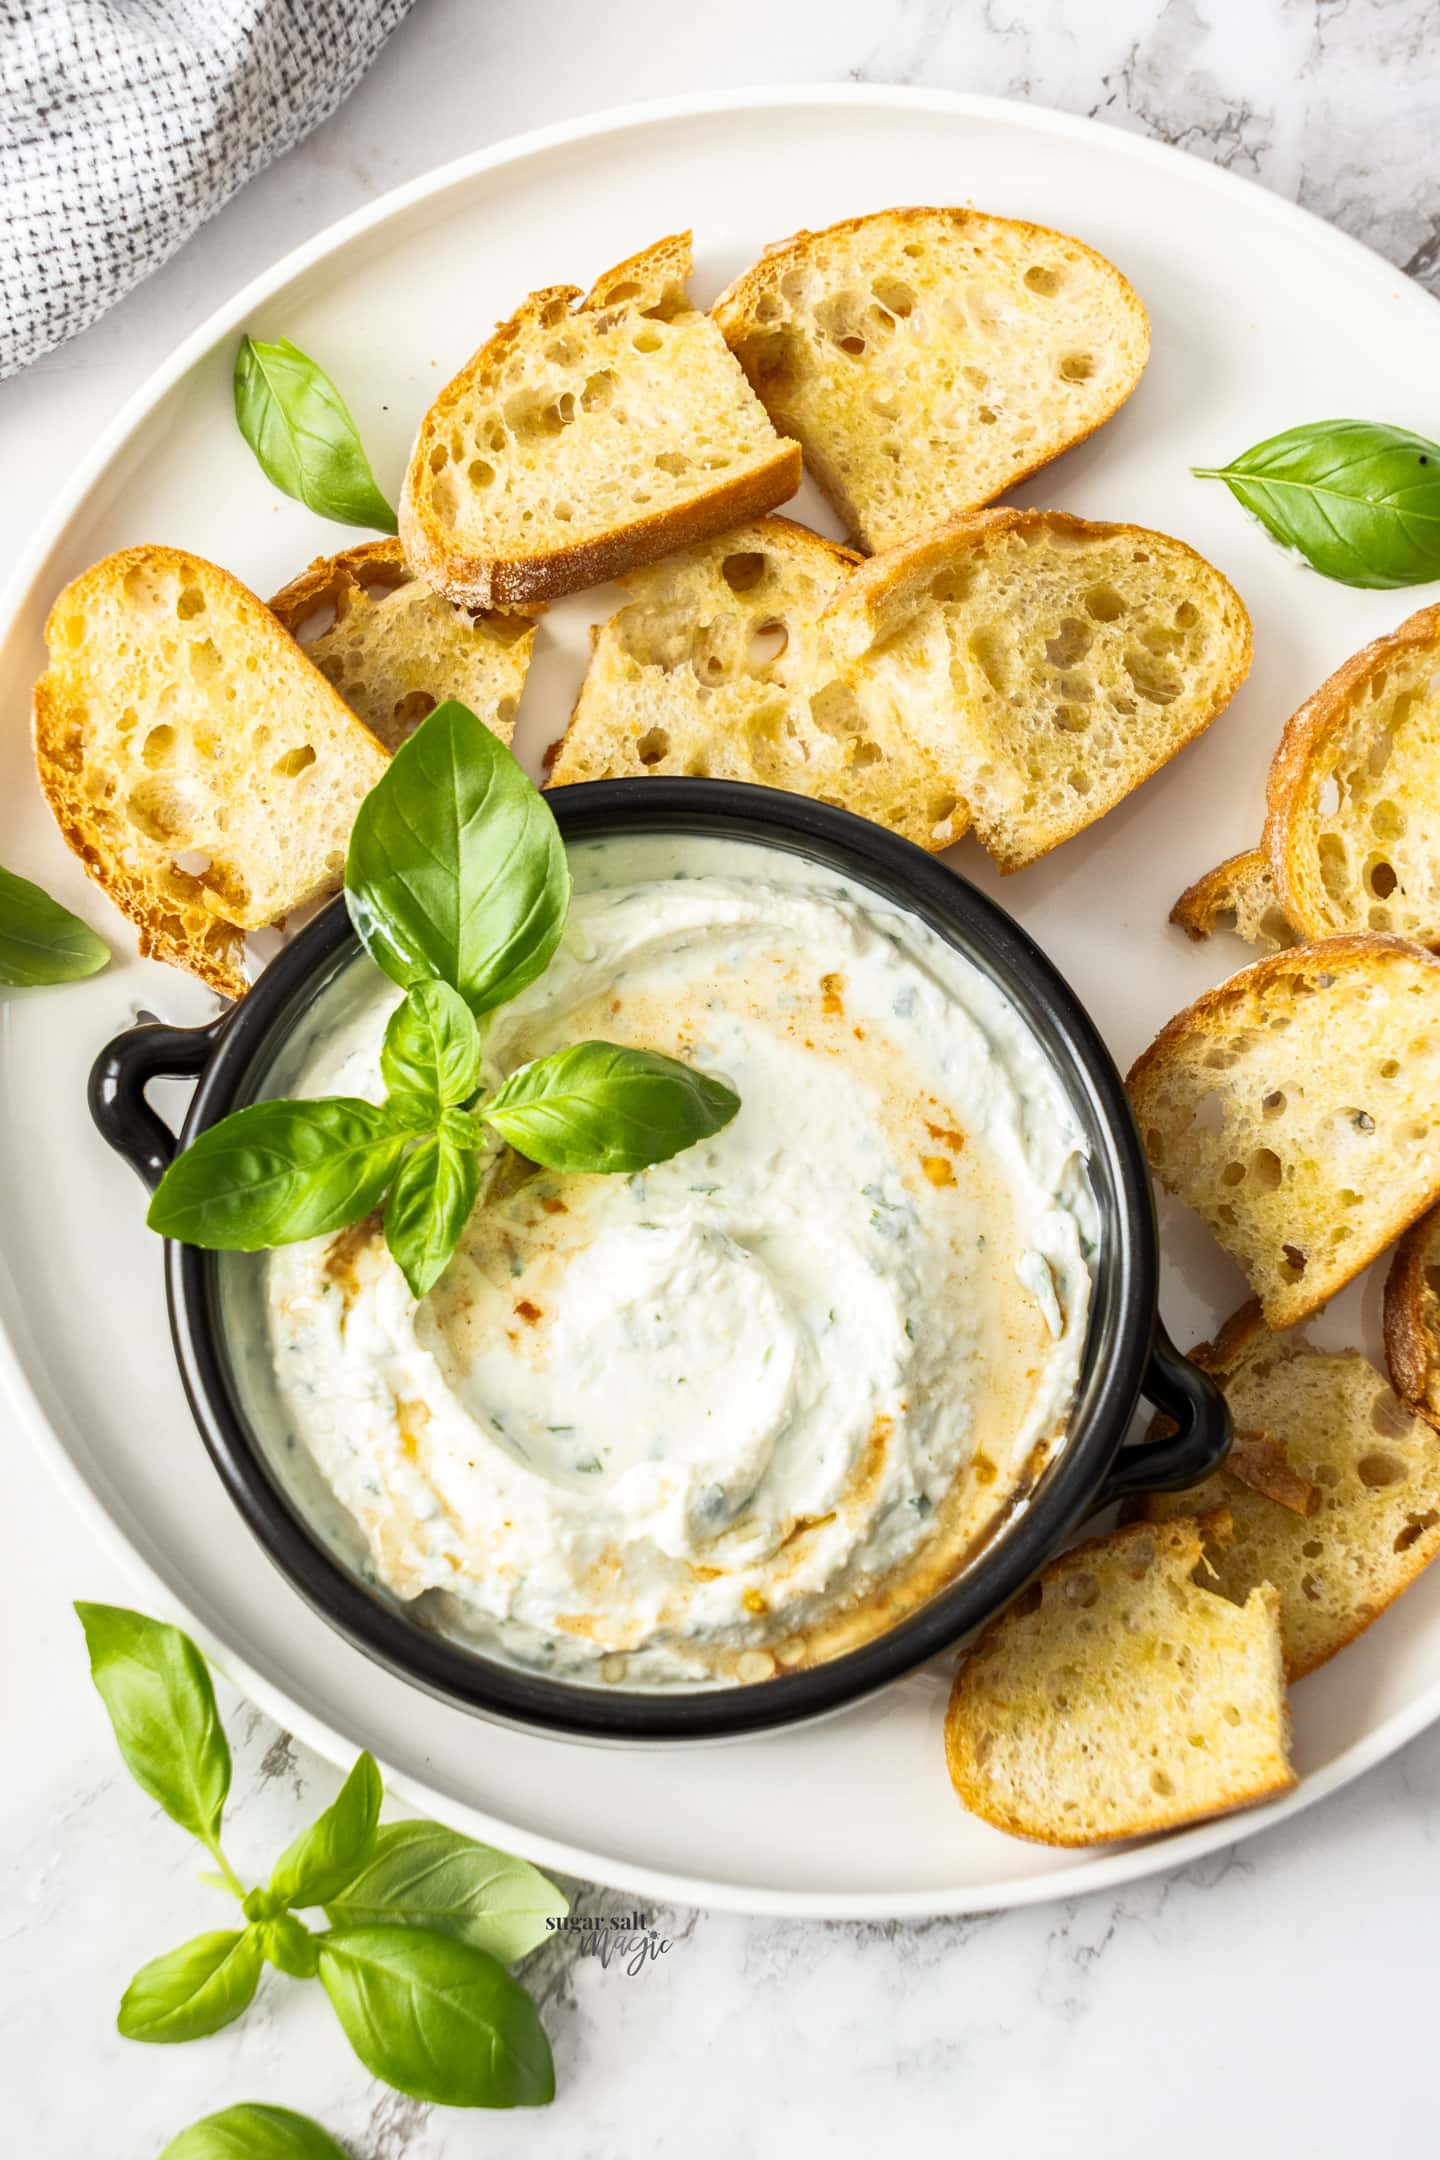 Top down view of ricotta dip in a bowl.